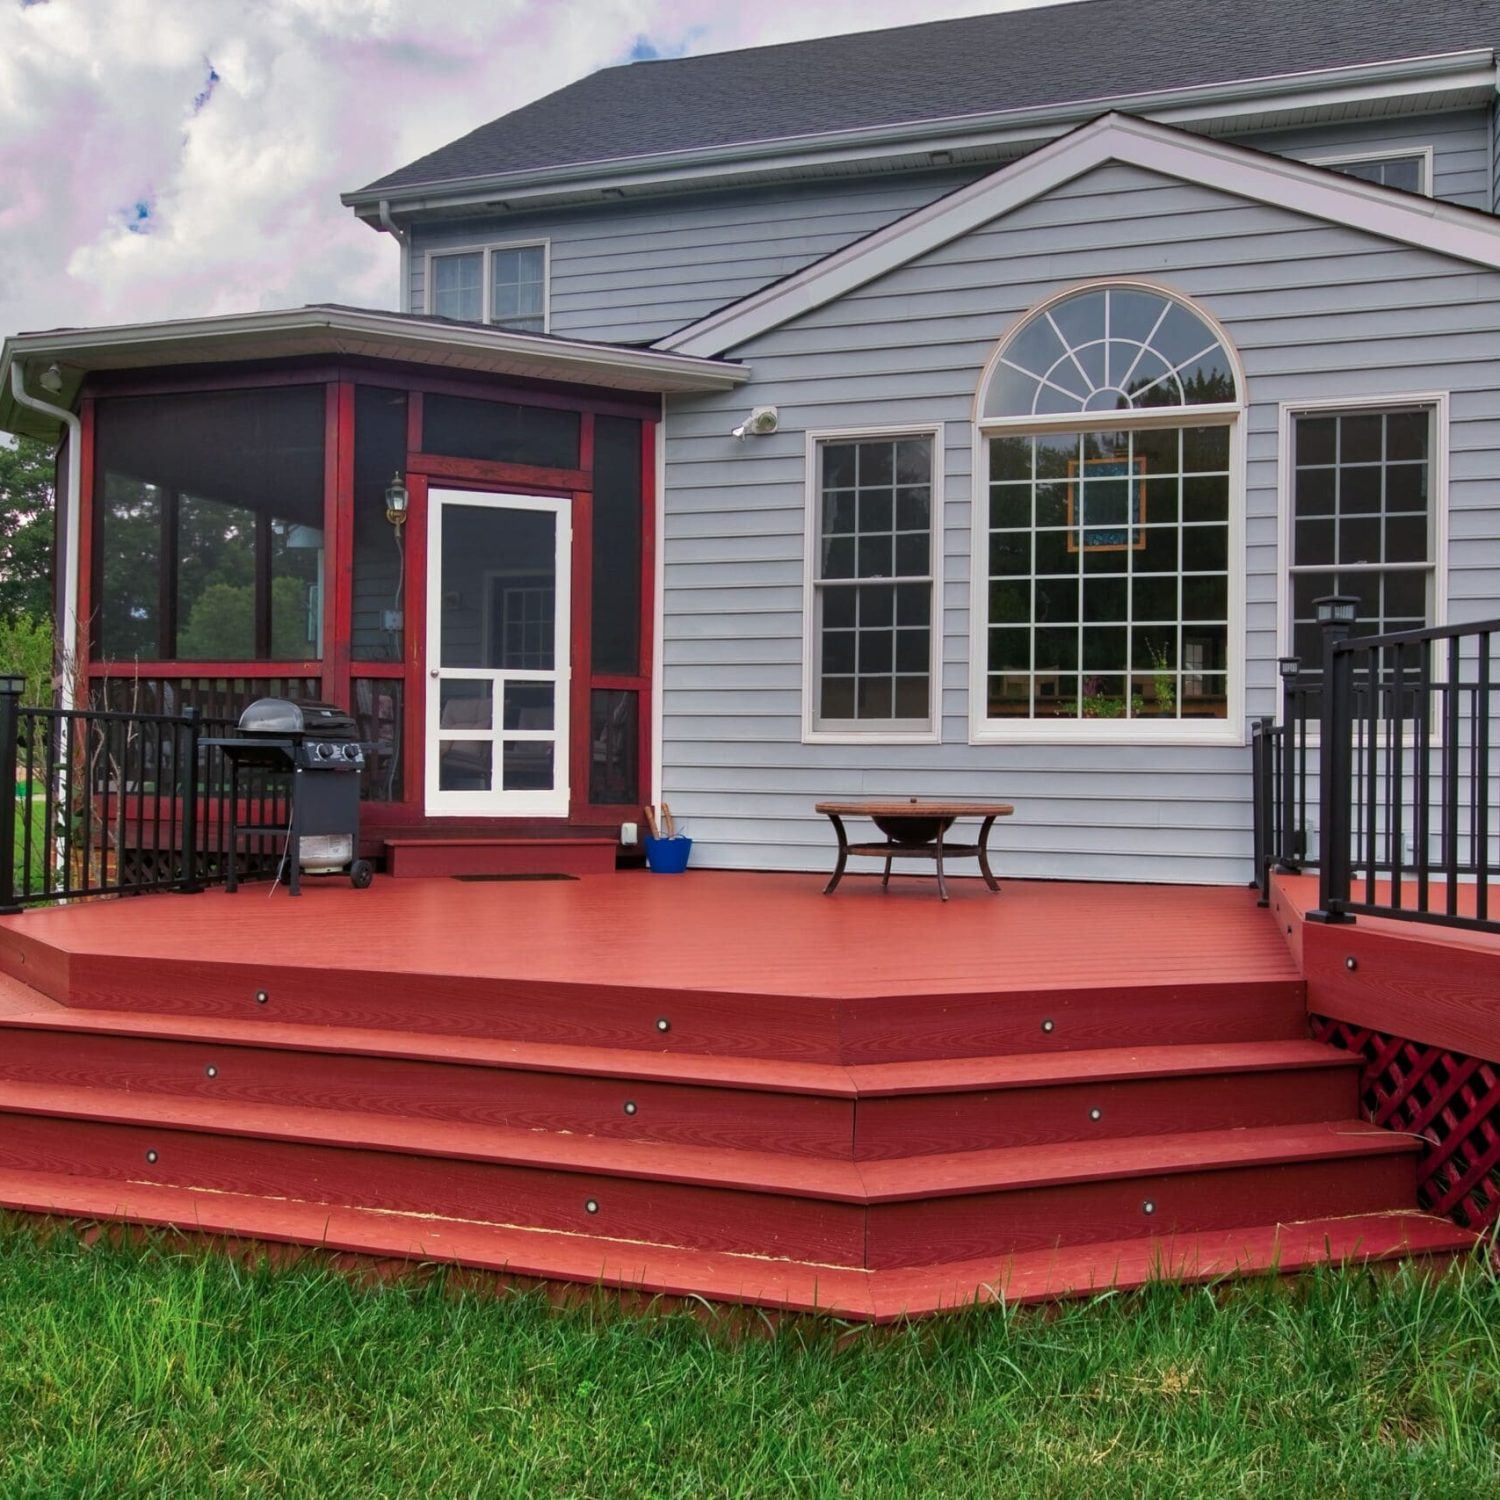 House with Gray Vinyl Siding, Covered Porch and a Custom Red Wood Deck built by Deck Creations.